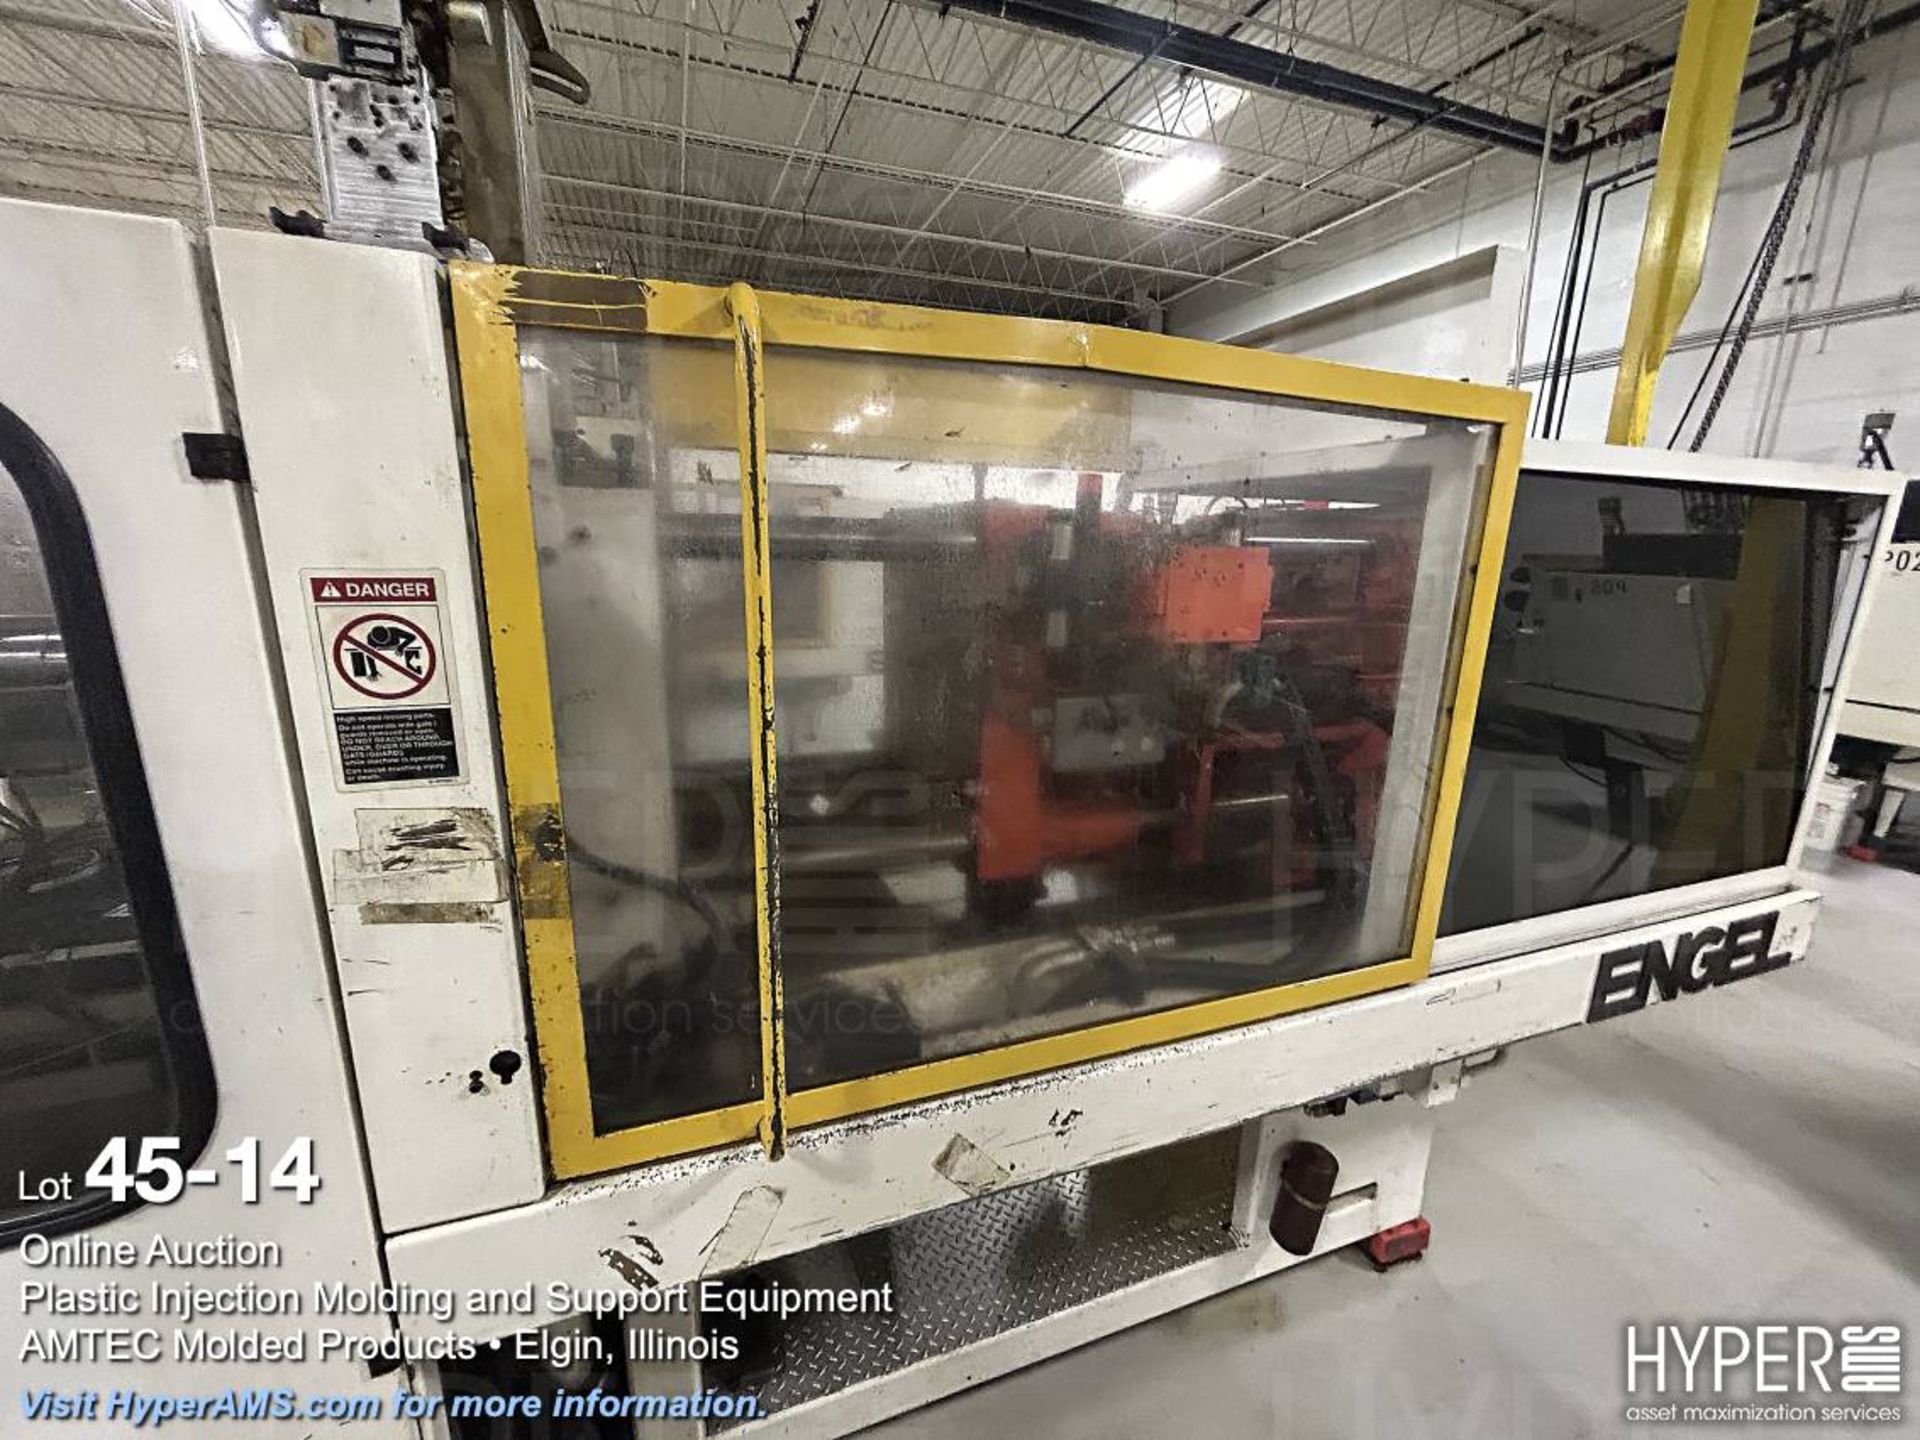 Engel ES330/100AH toggle clamp plastic injection molding machine - Image 14 of 16